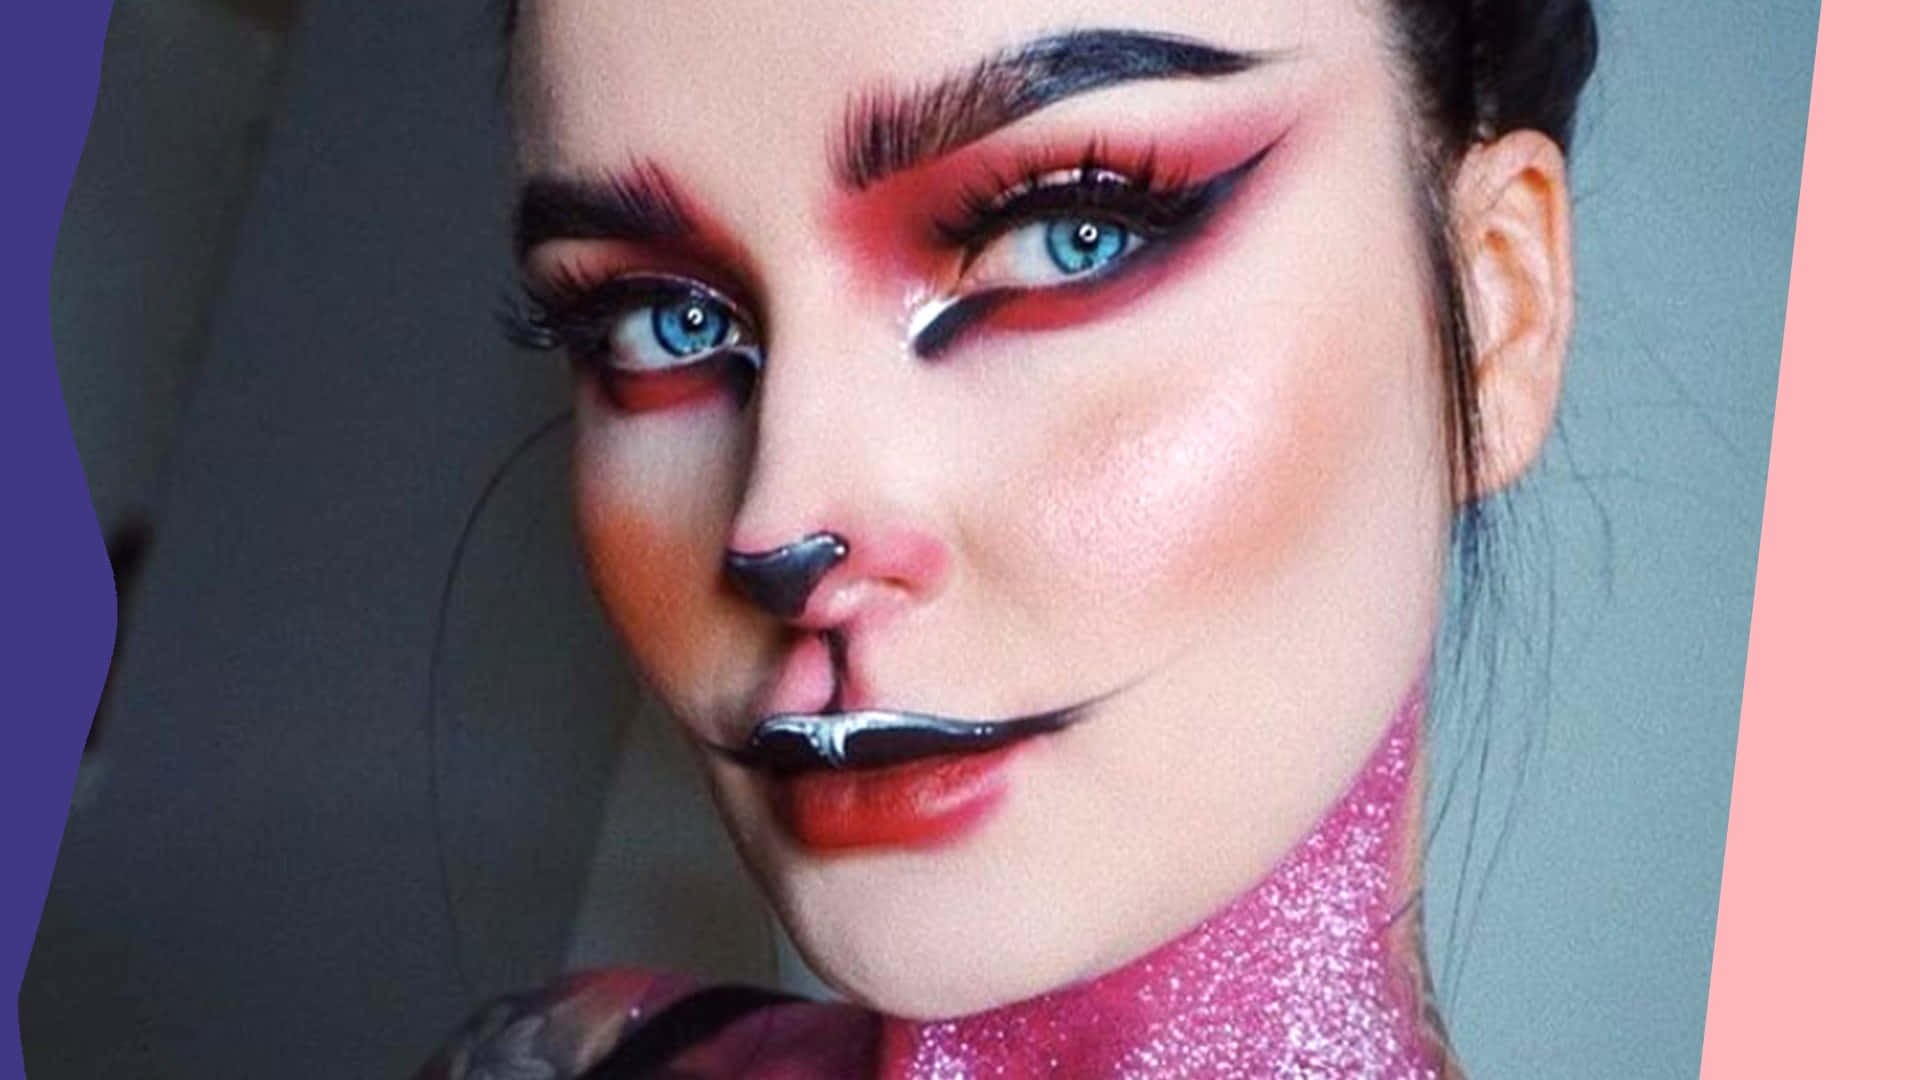 Get in the spooky spirit with this wickedly creative Halloween makeup! Wallpaper